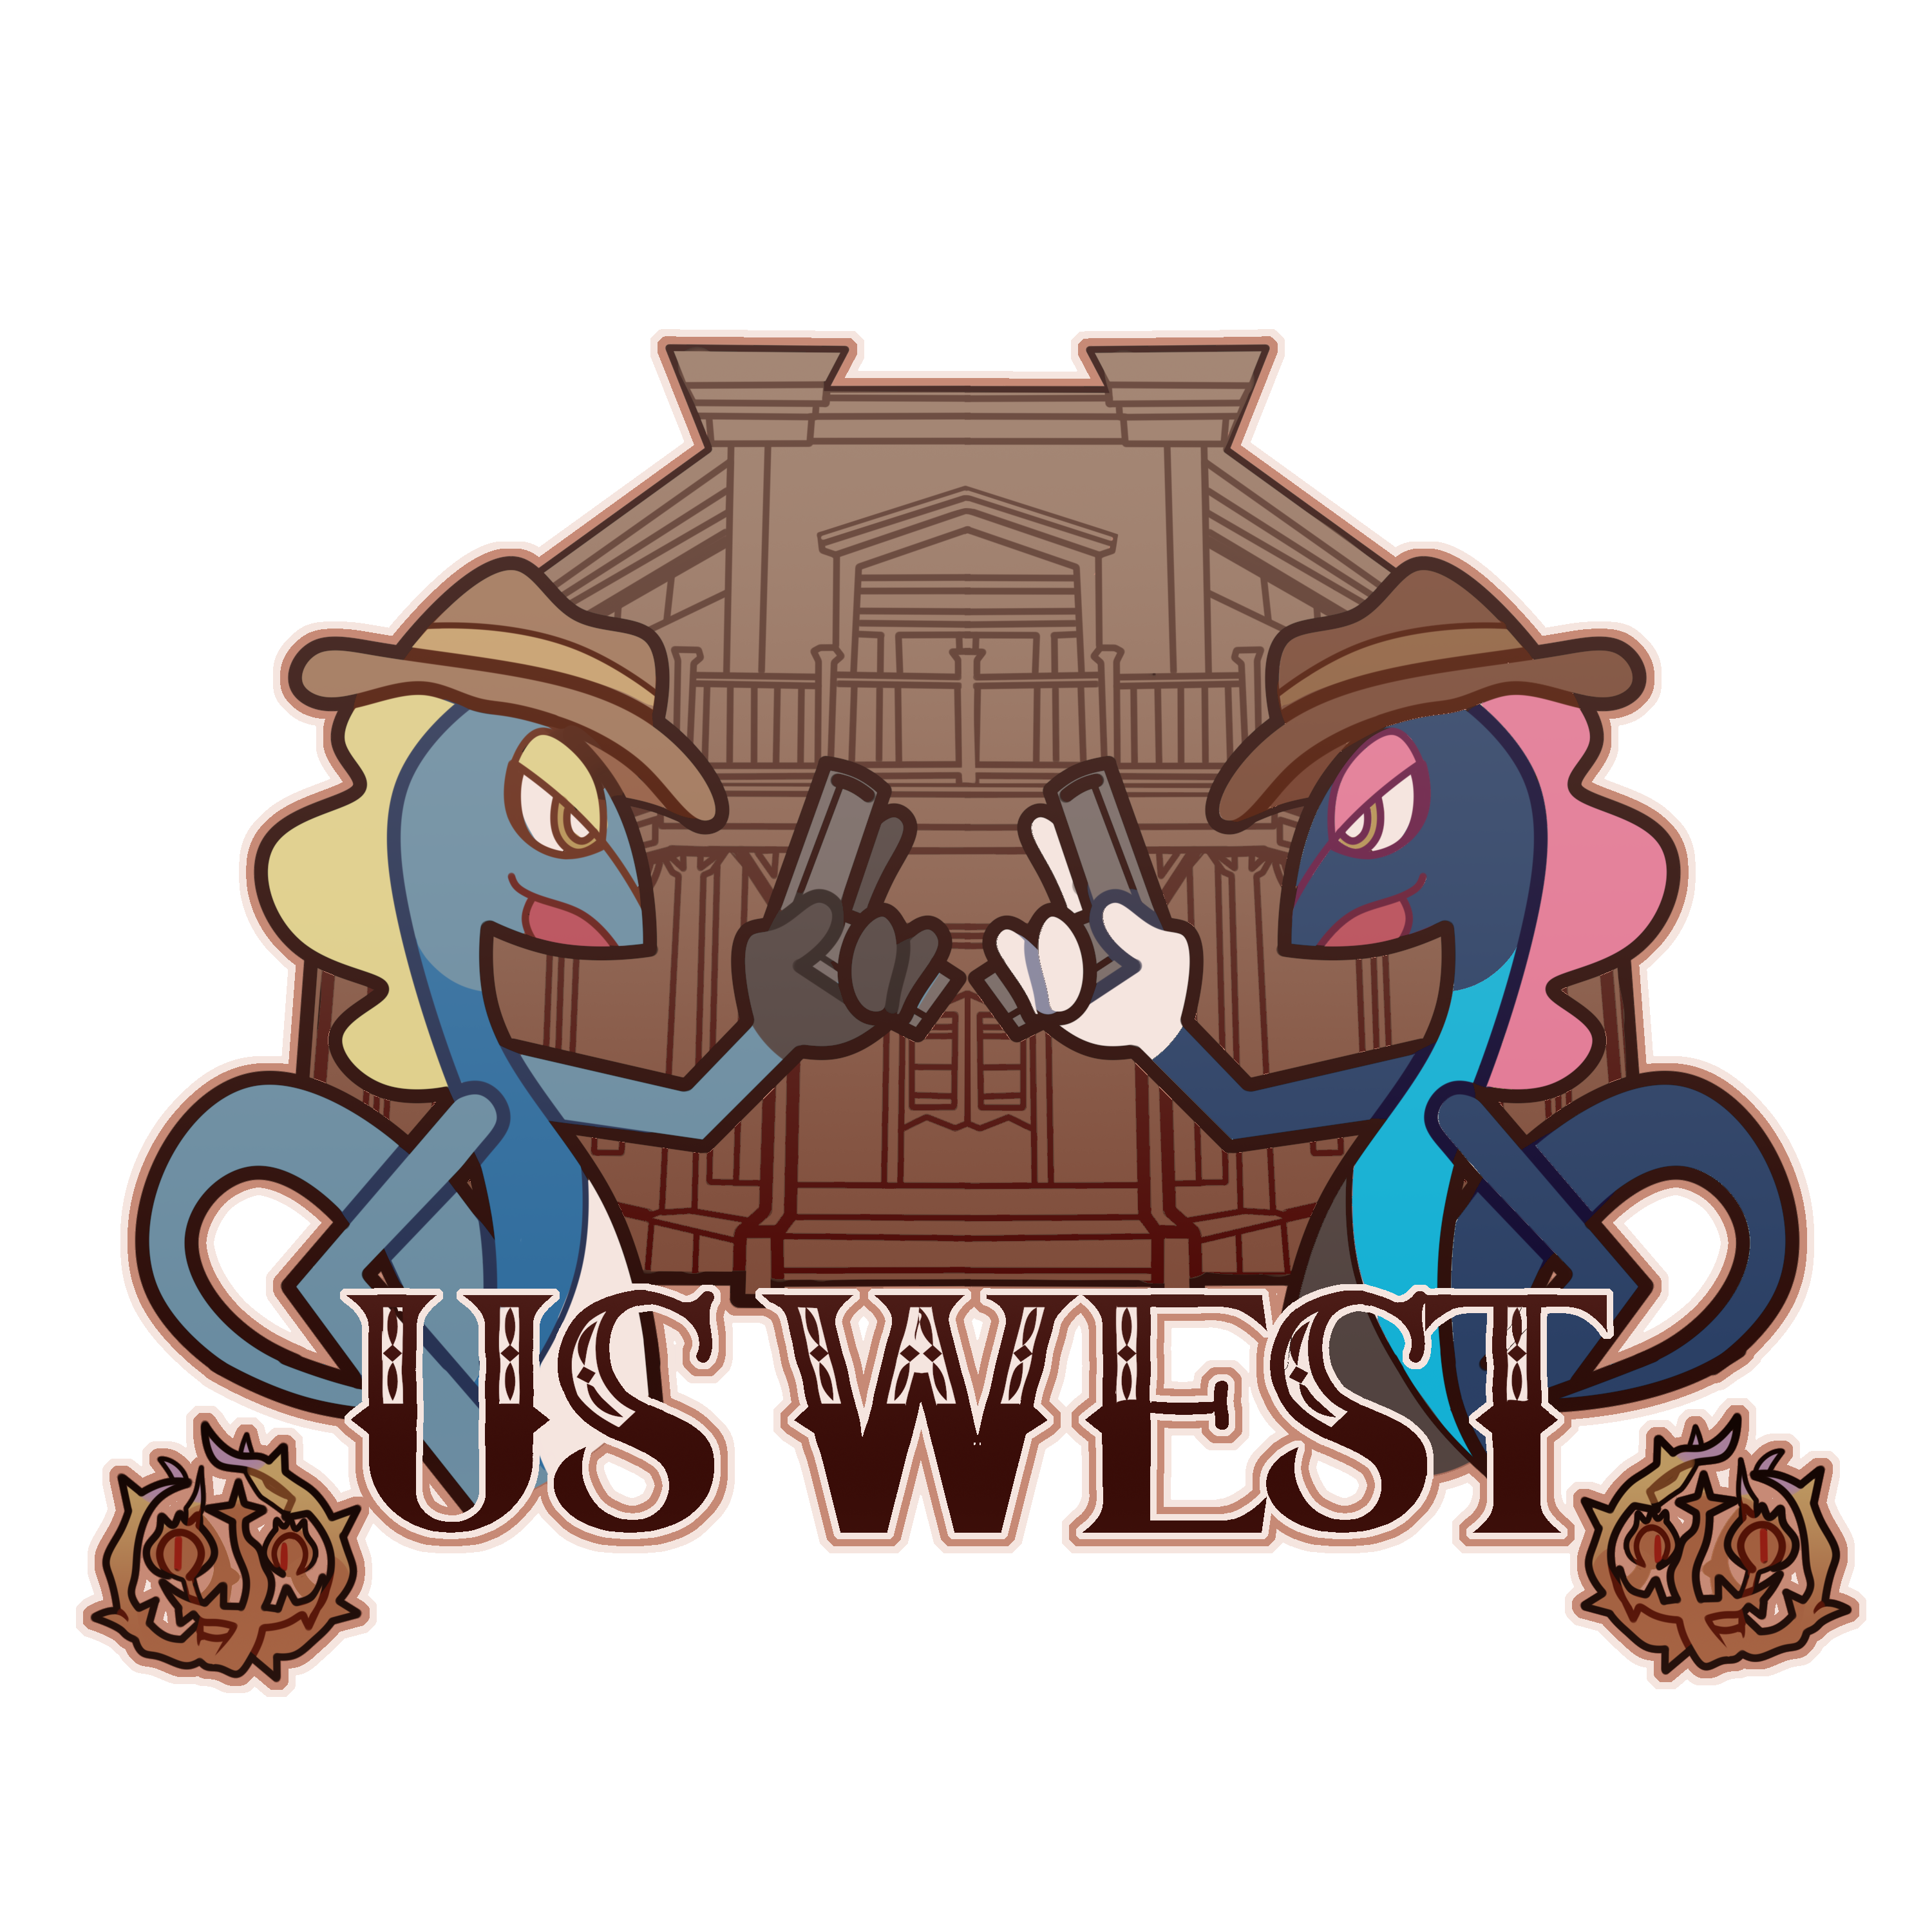 uswest.png